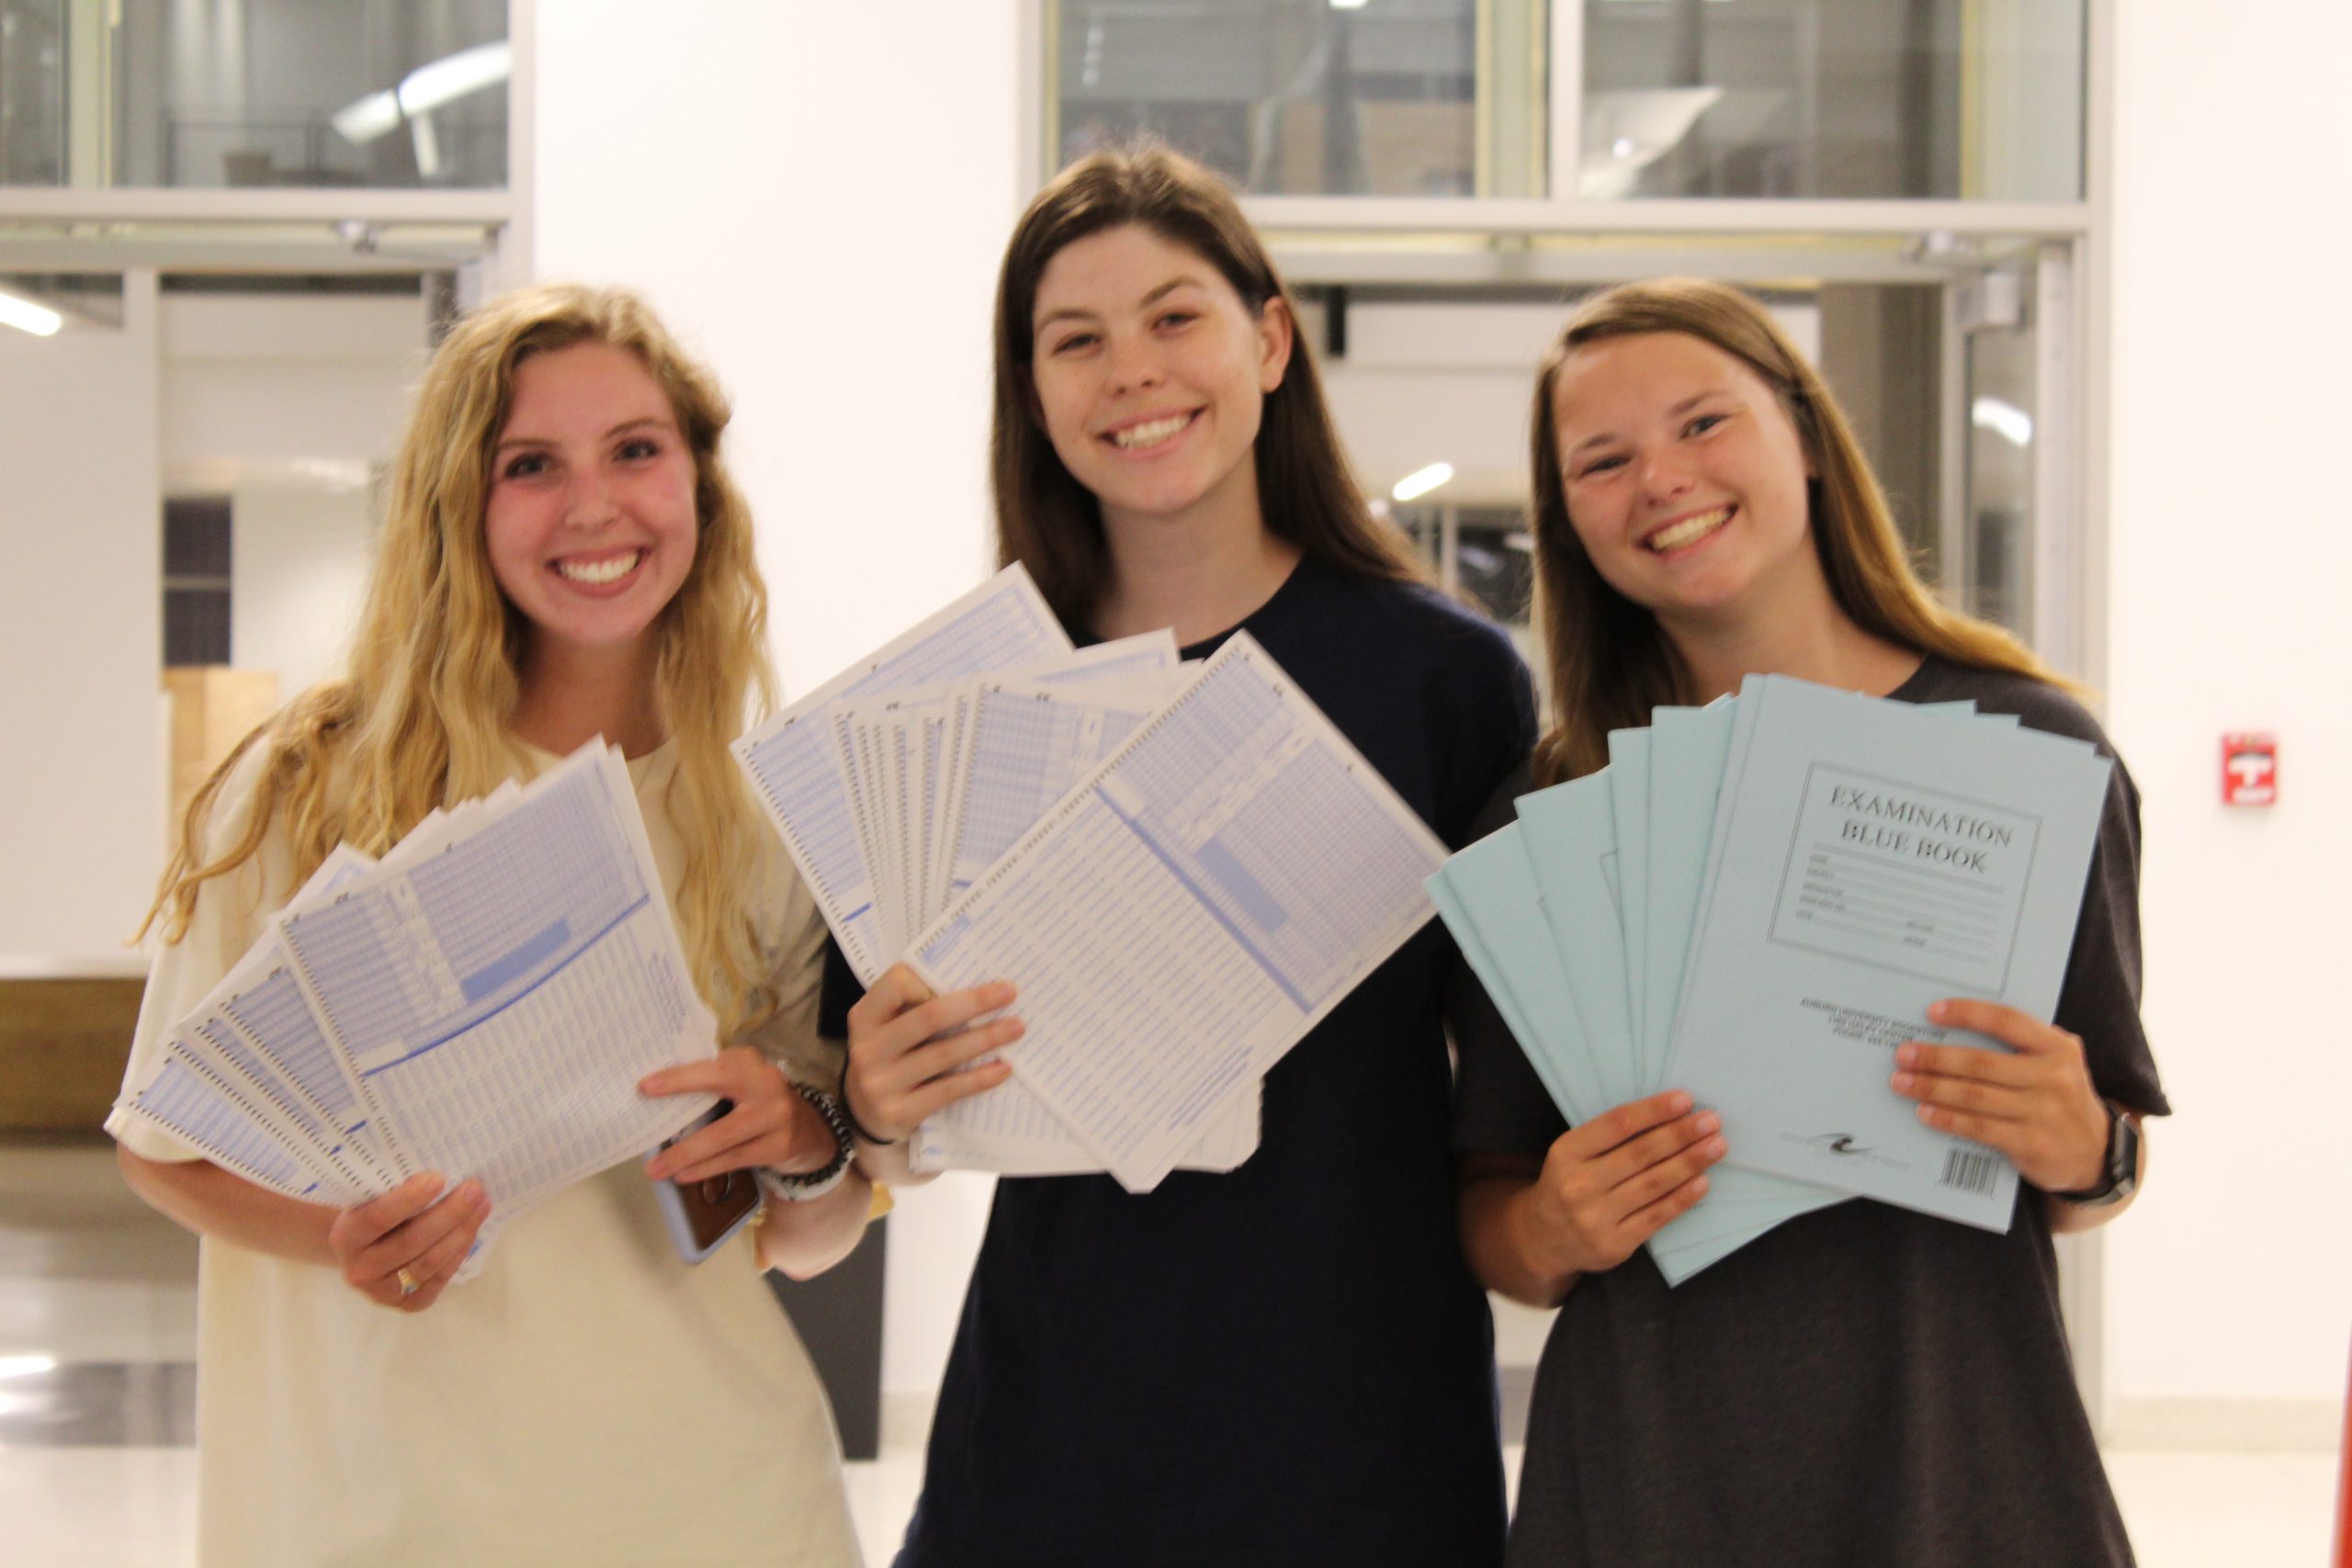 Three Student Government Association members stand in the Mell Classroom Building at a past Up All Night. They are holding scantrons and Blue Books that they passed out to students as they prepare for finals.